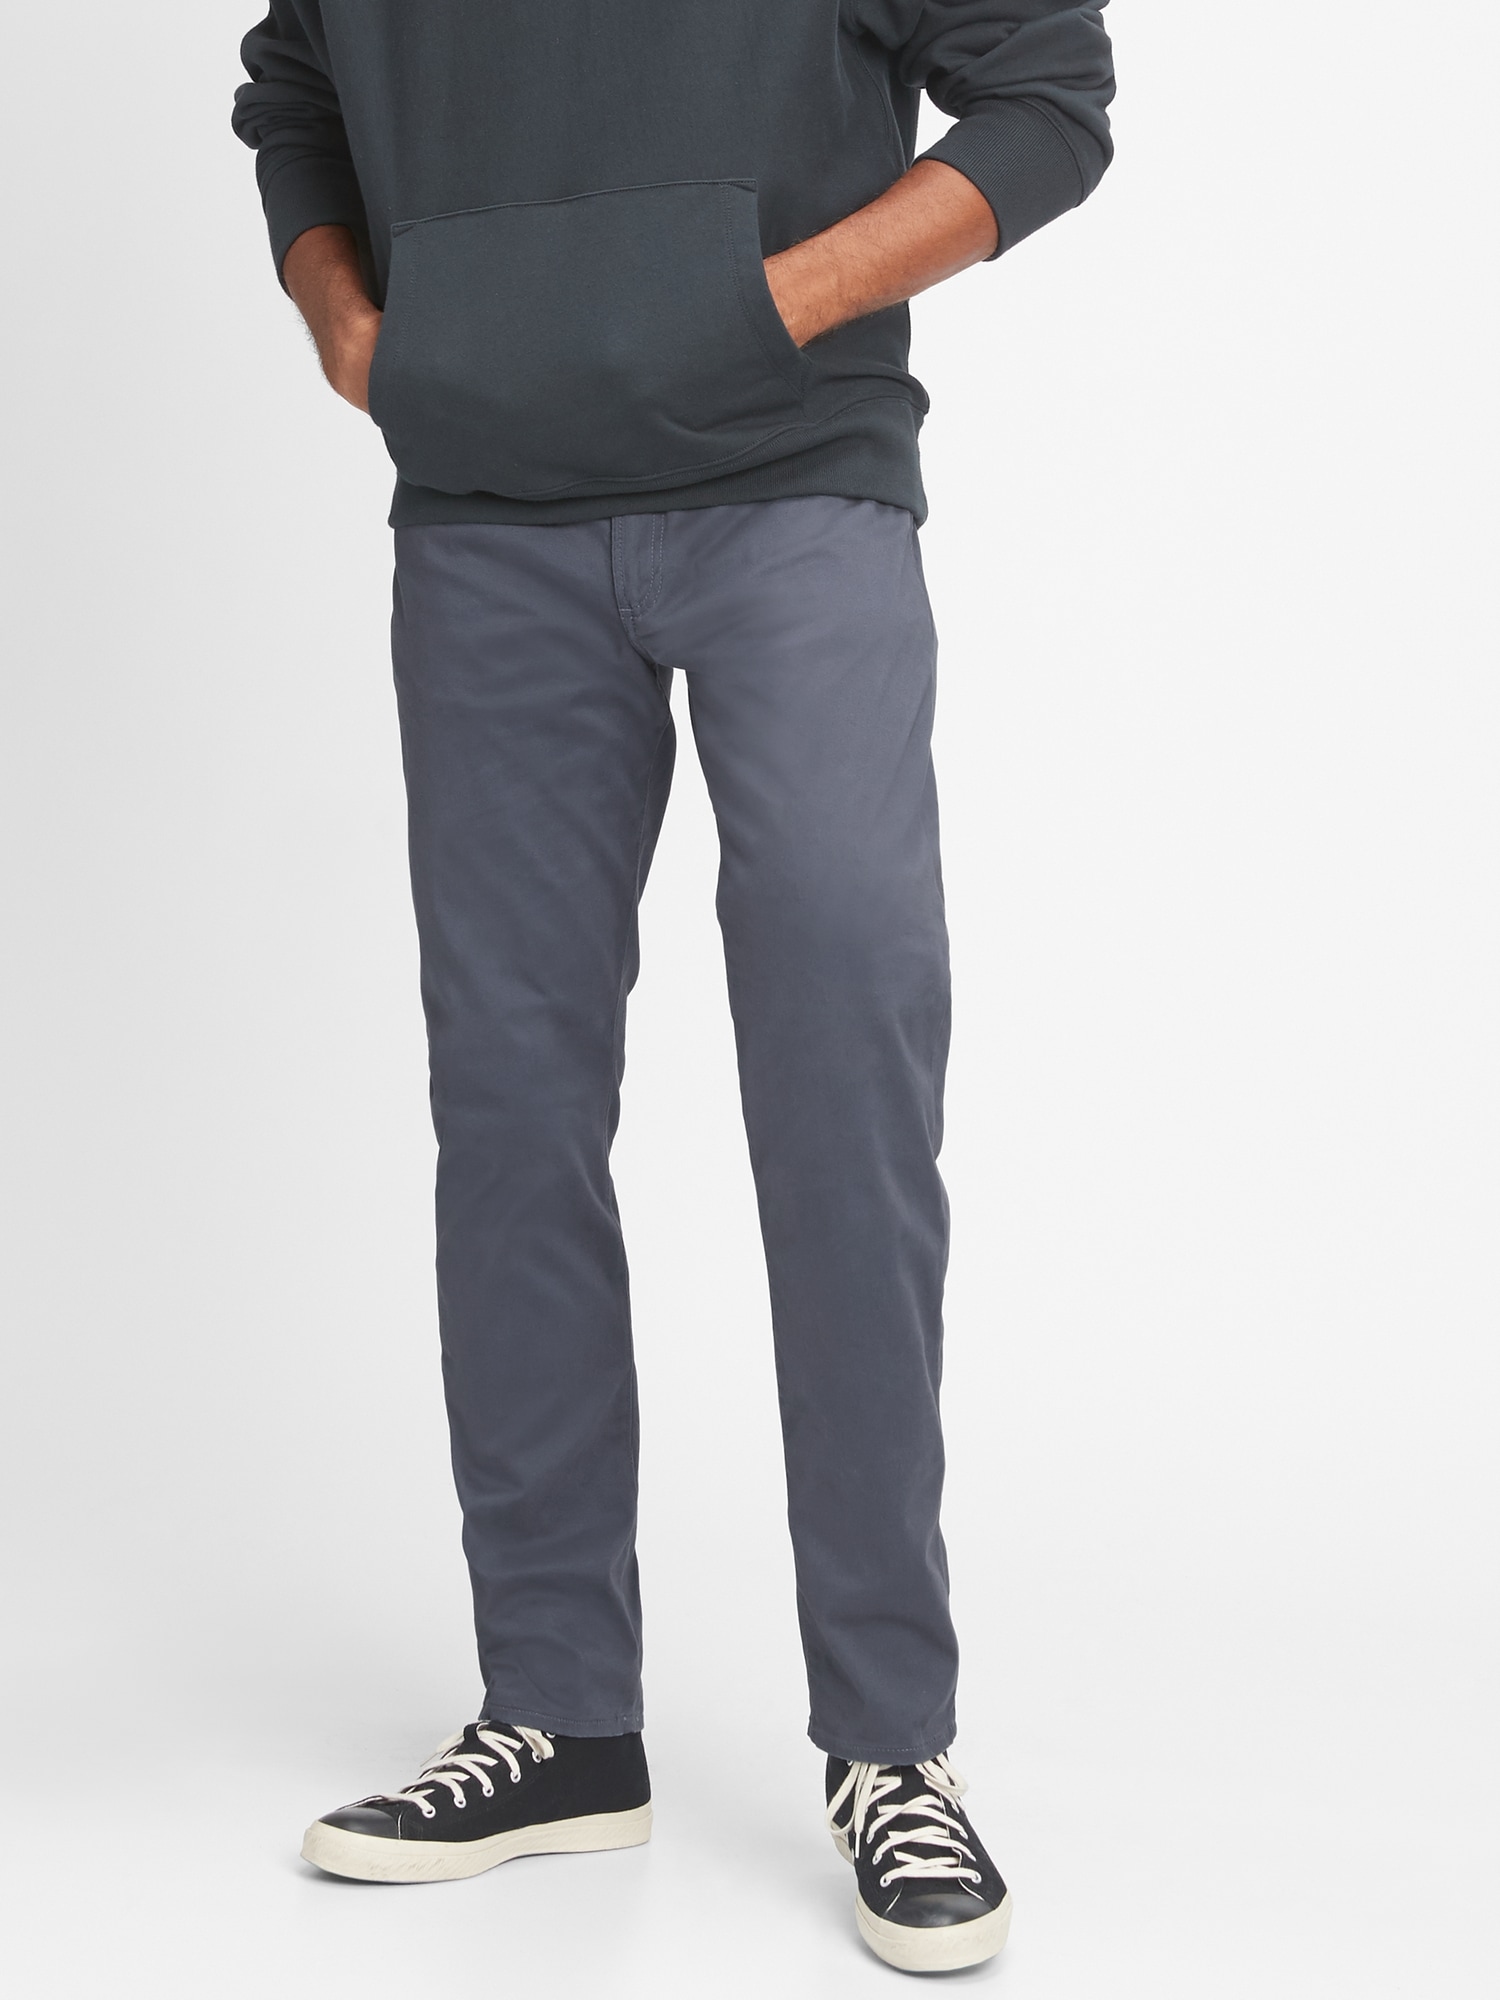 Buy Gap Dark Grey Soft Wear Slim Fit Jeans from Next Luxembourg